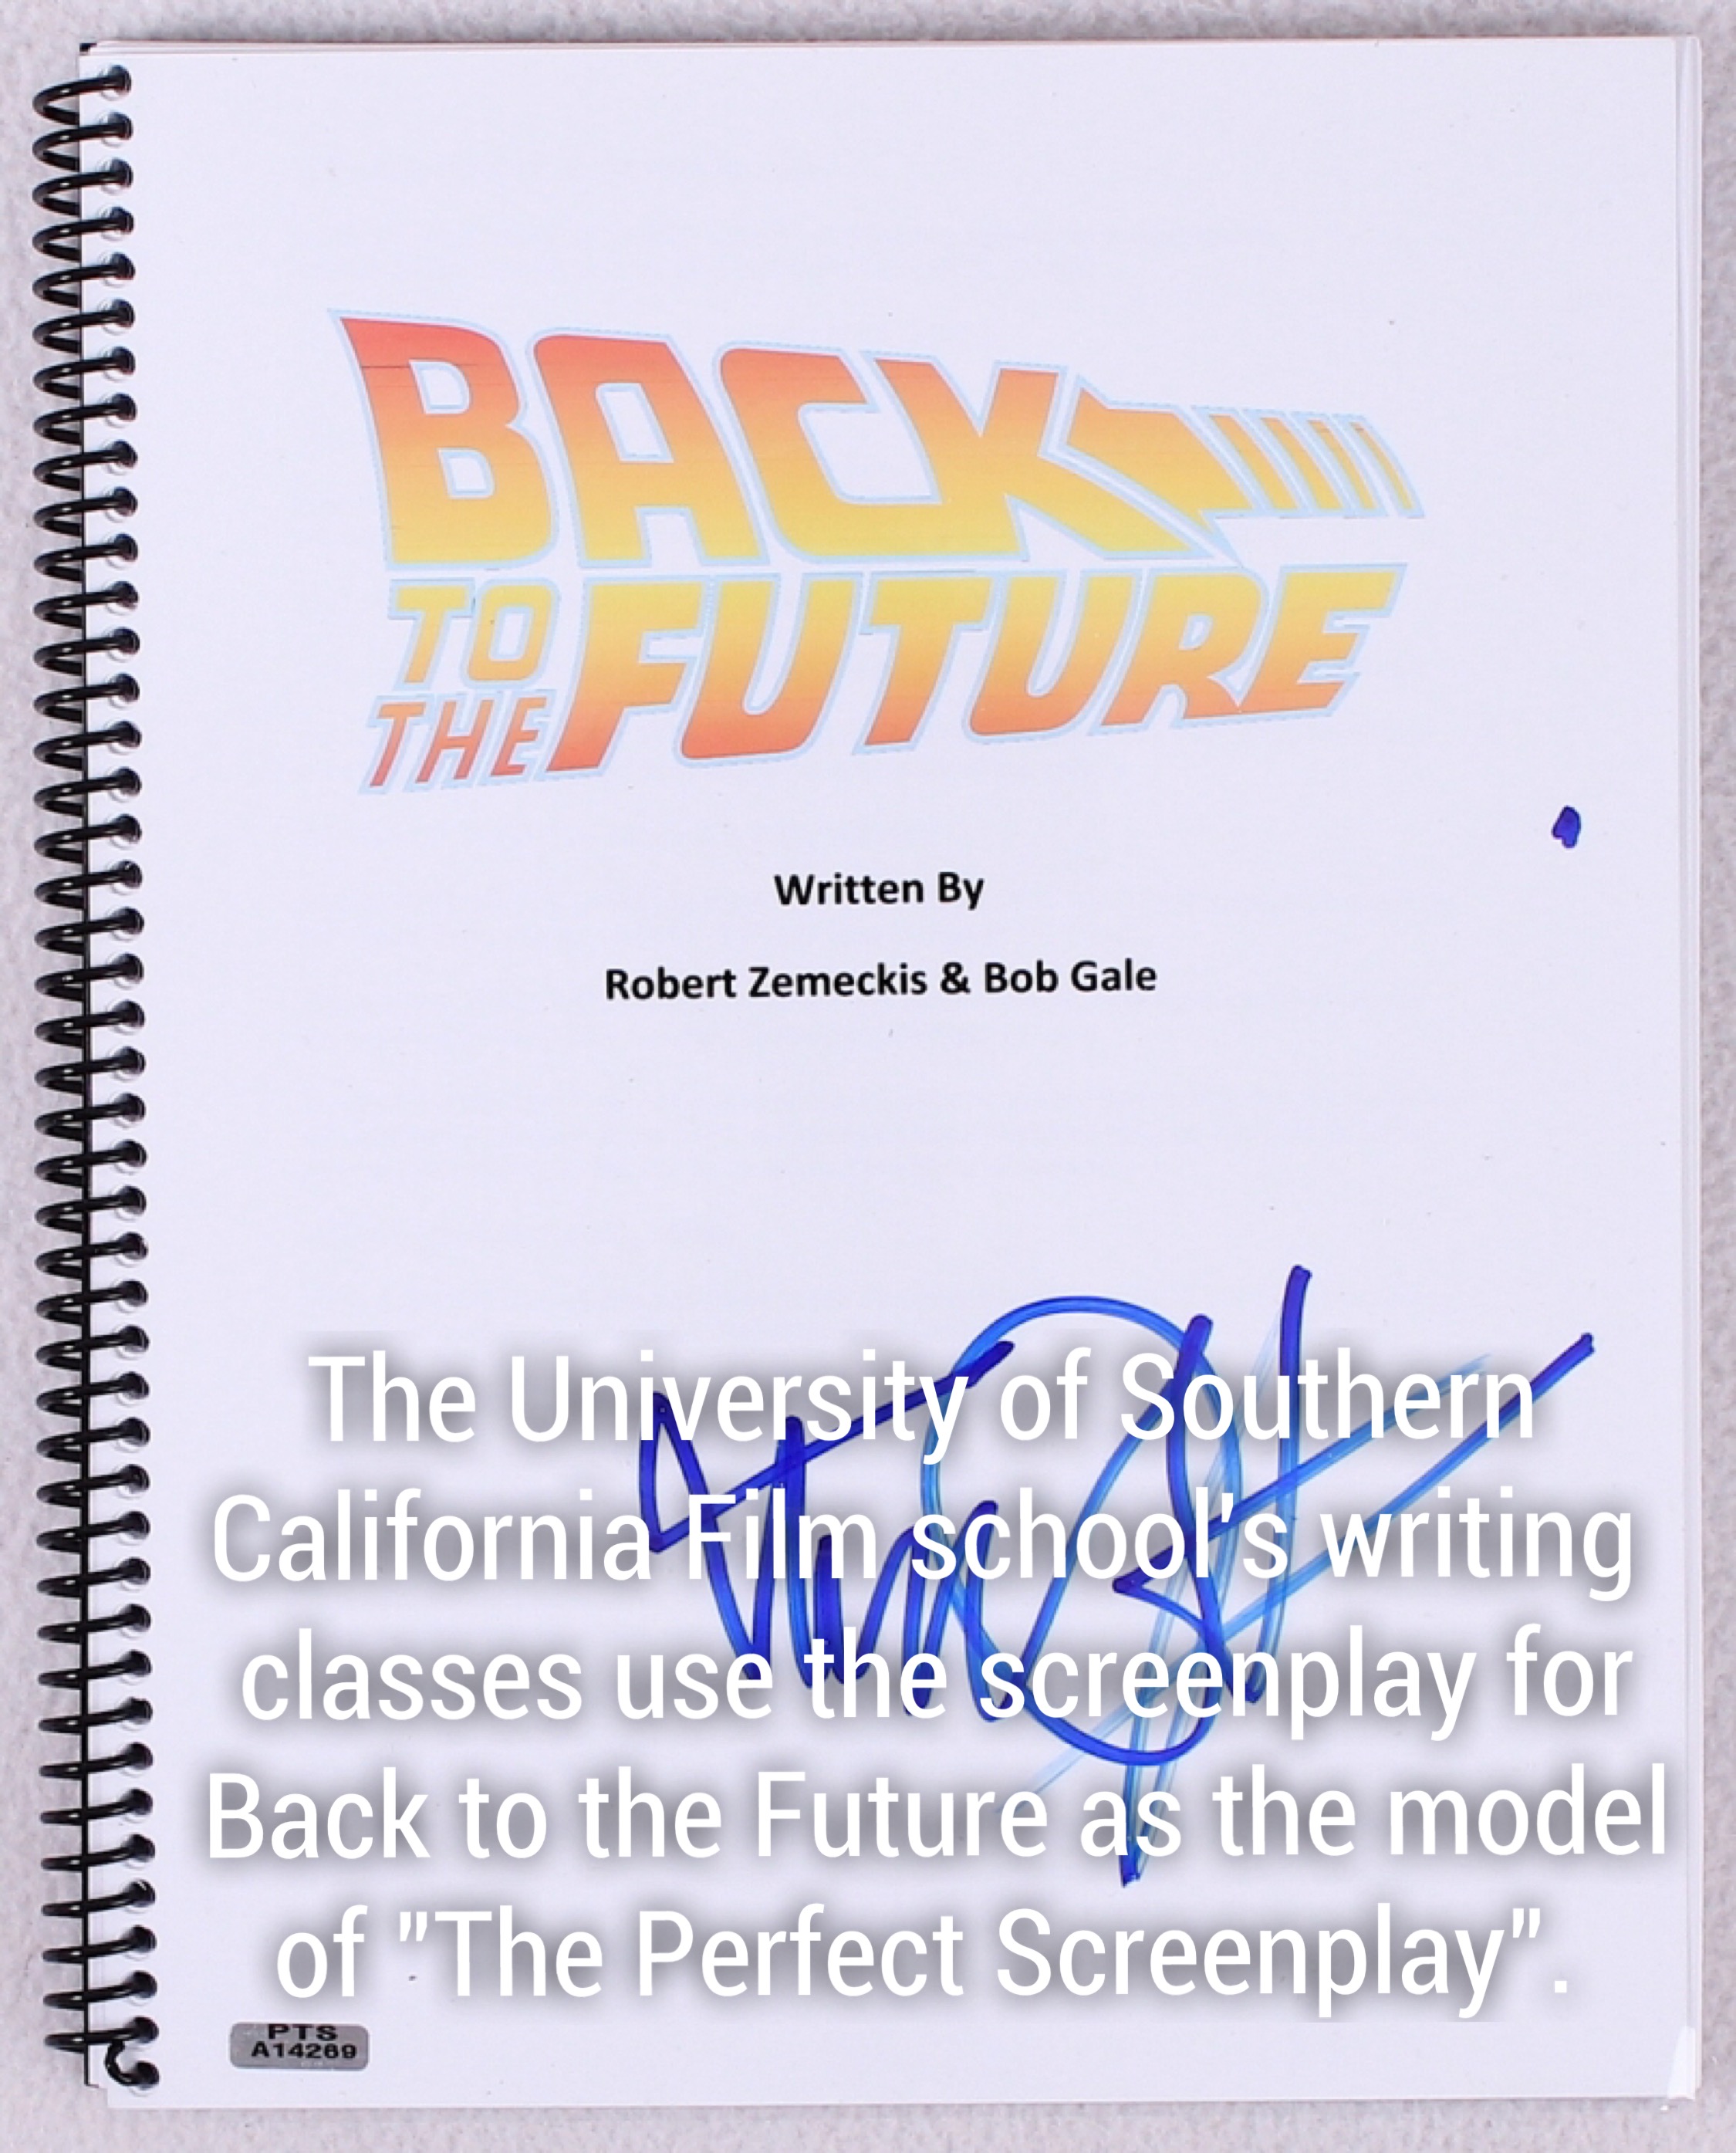 back to the future - Future Written By Robert Zemeckis & Bob Gale The University of Southern California Film school's writing classes use the screenplay for Back to the Future as the model of "The Perfect Screenplay".